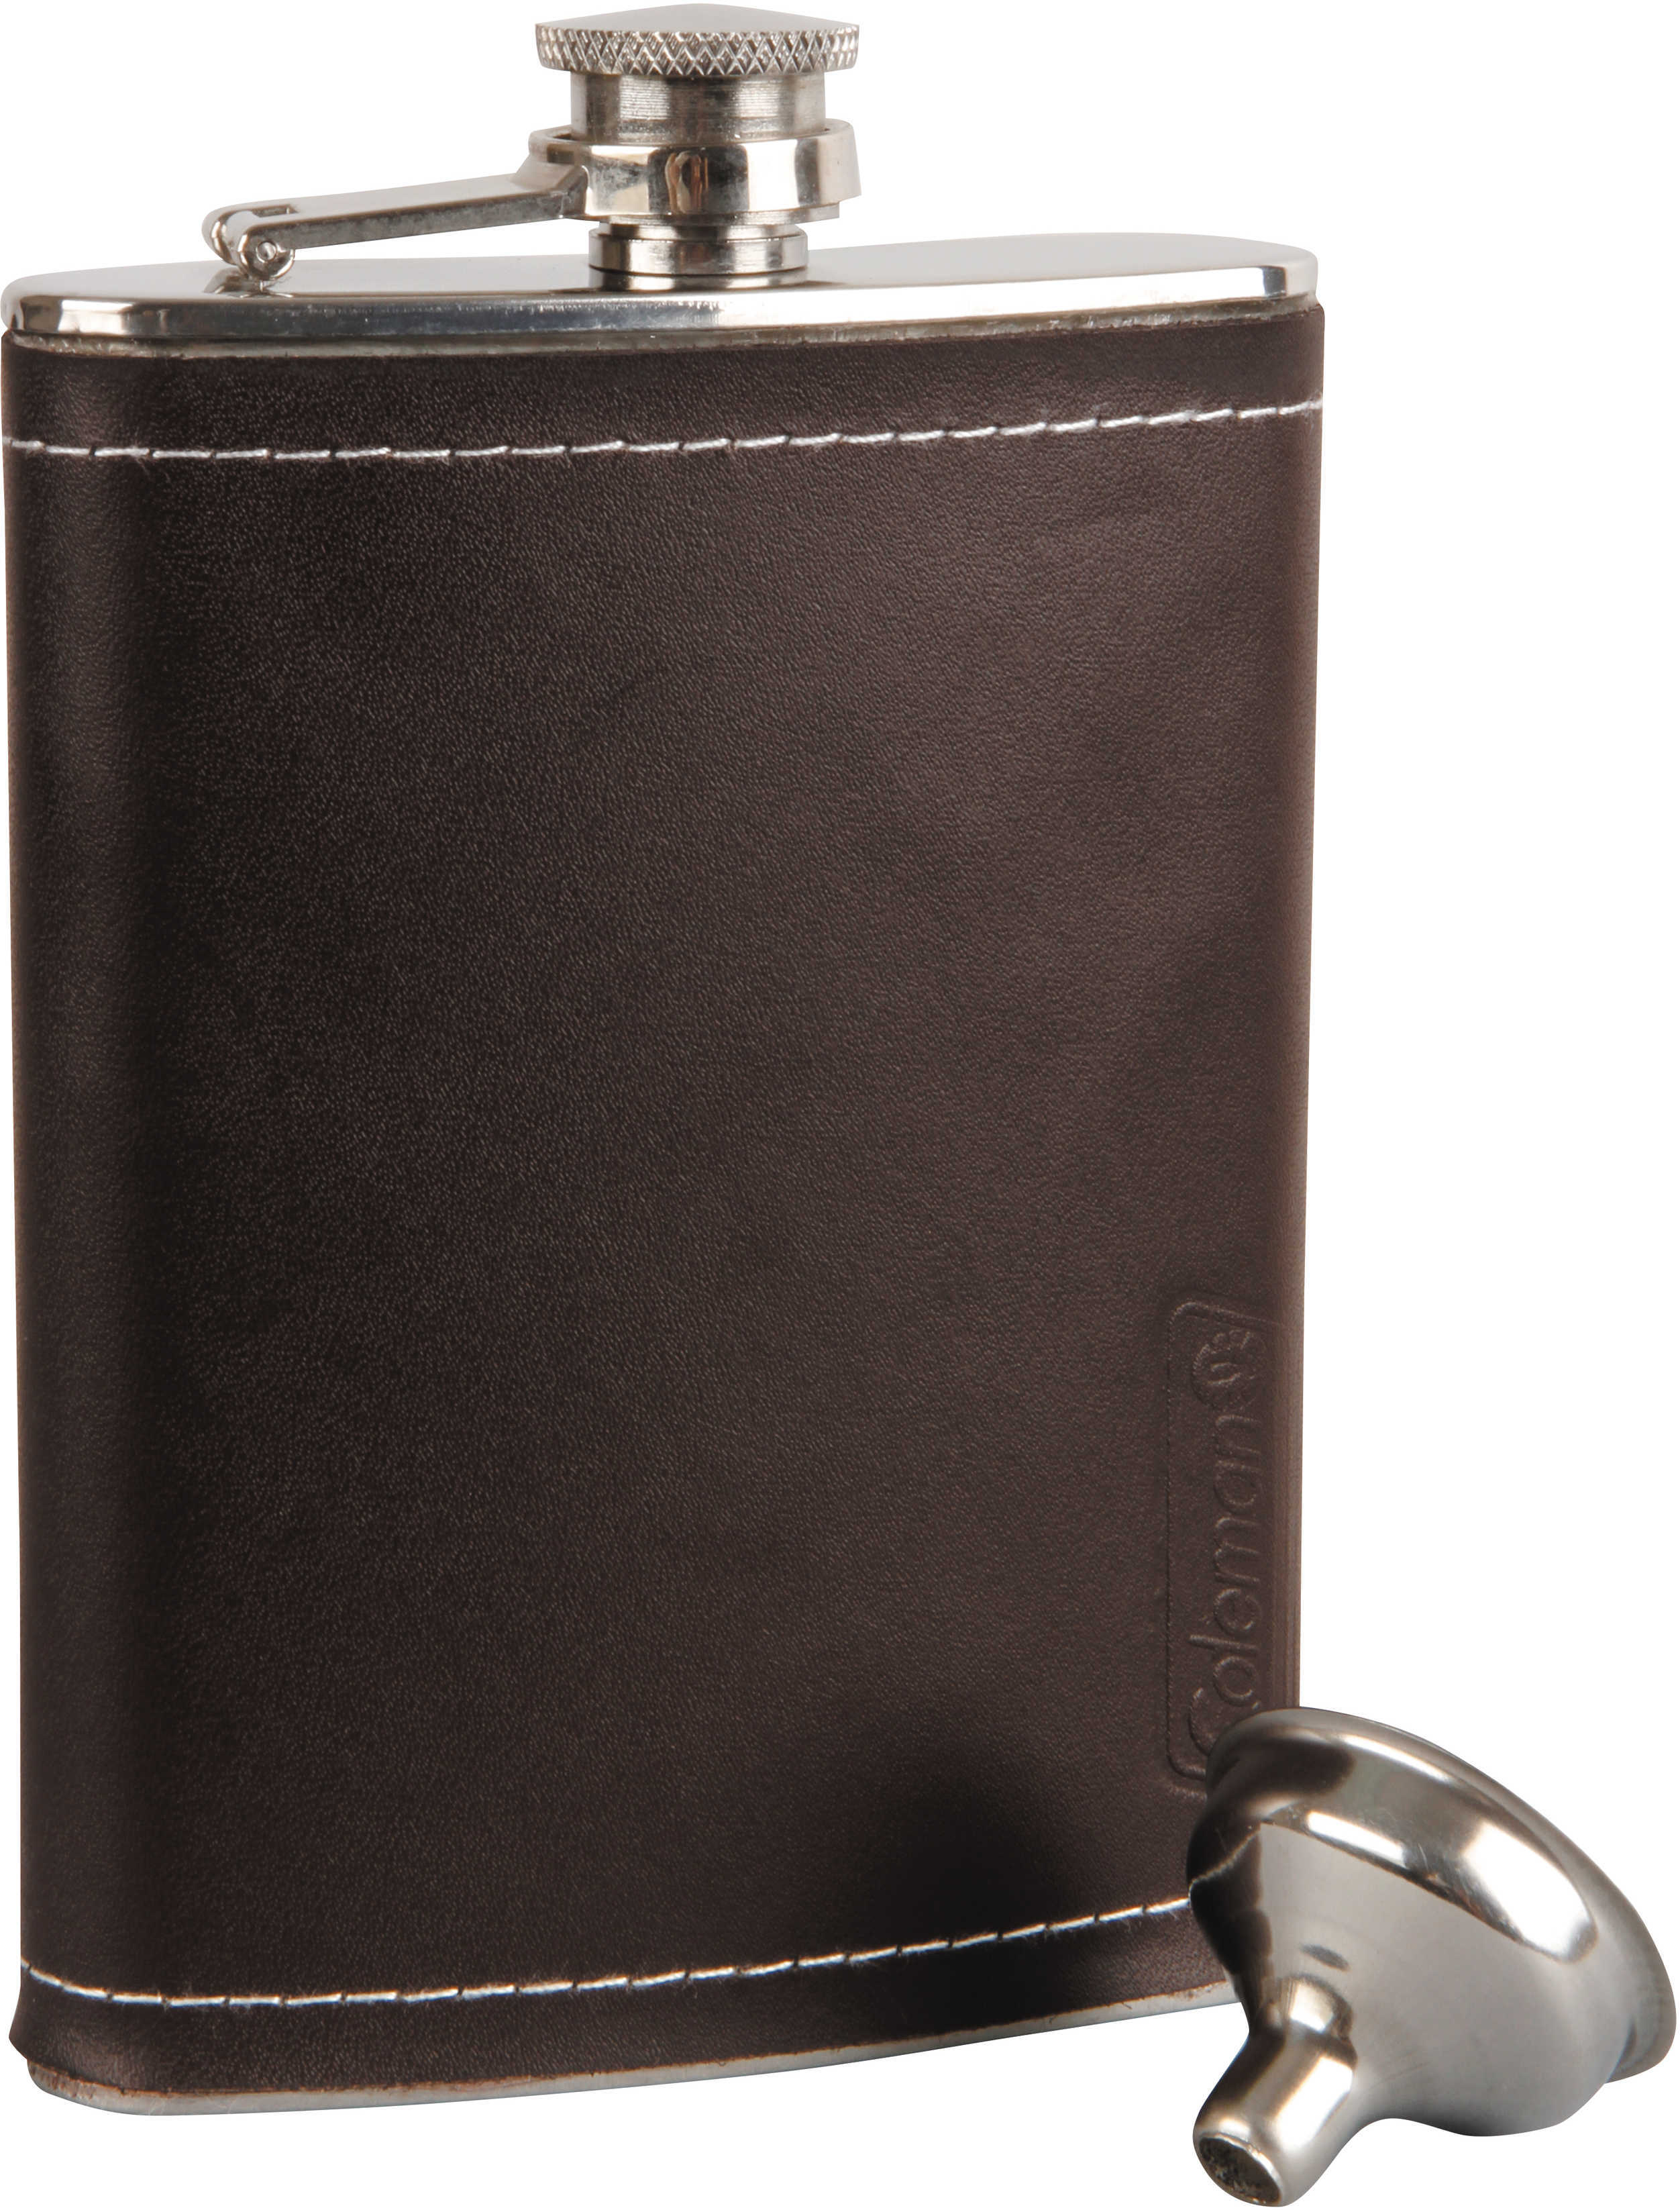 Coleman Flask Leather, 8 oz Tailgater Md: 2000016400